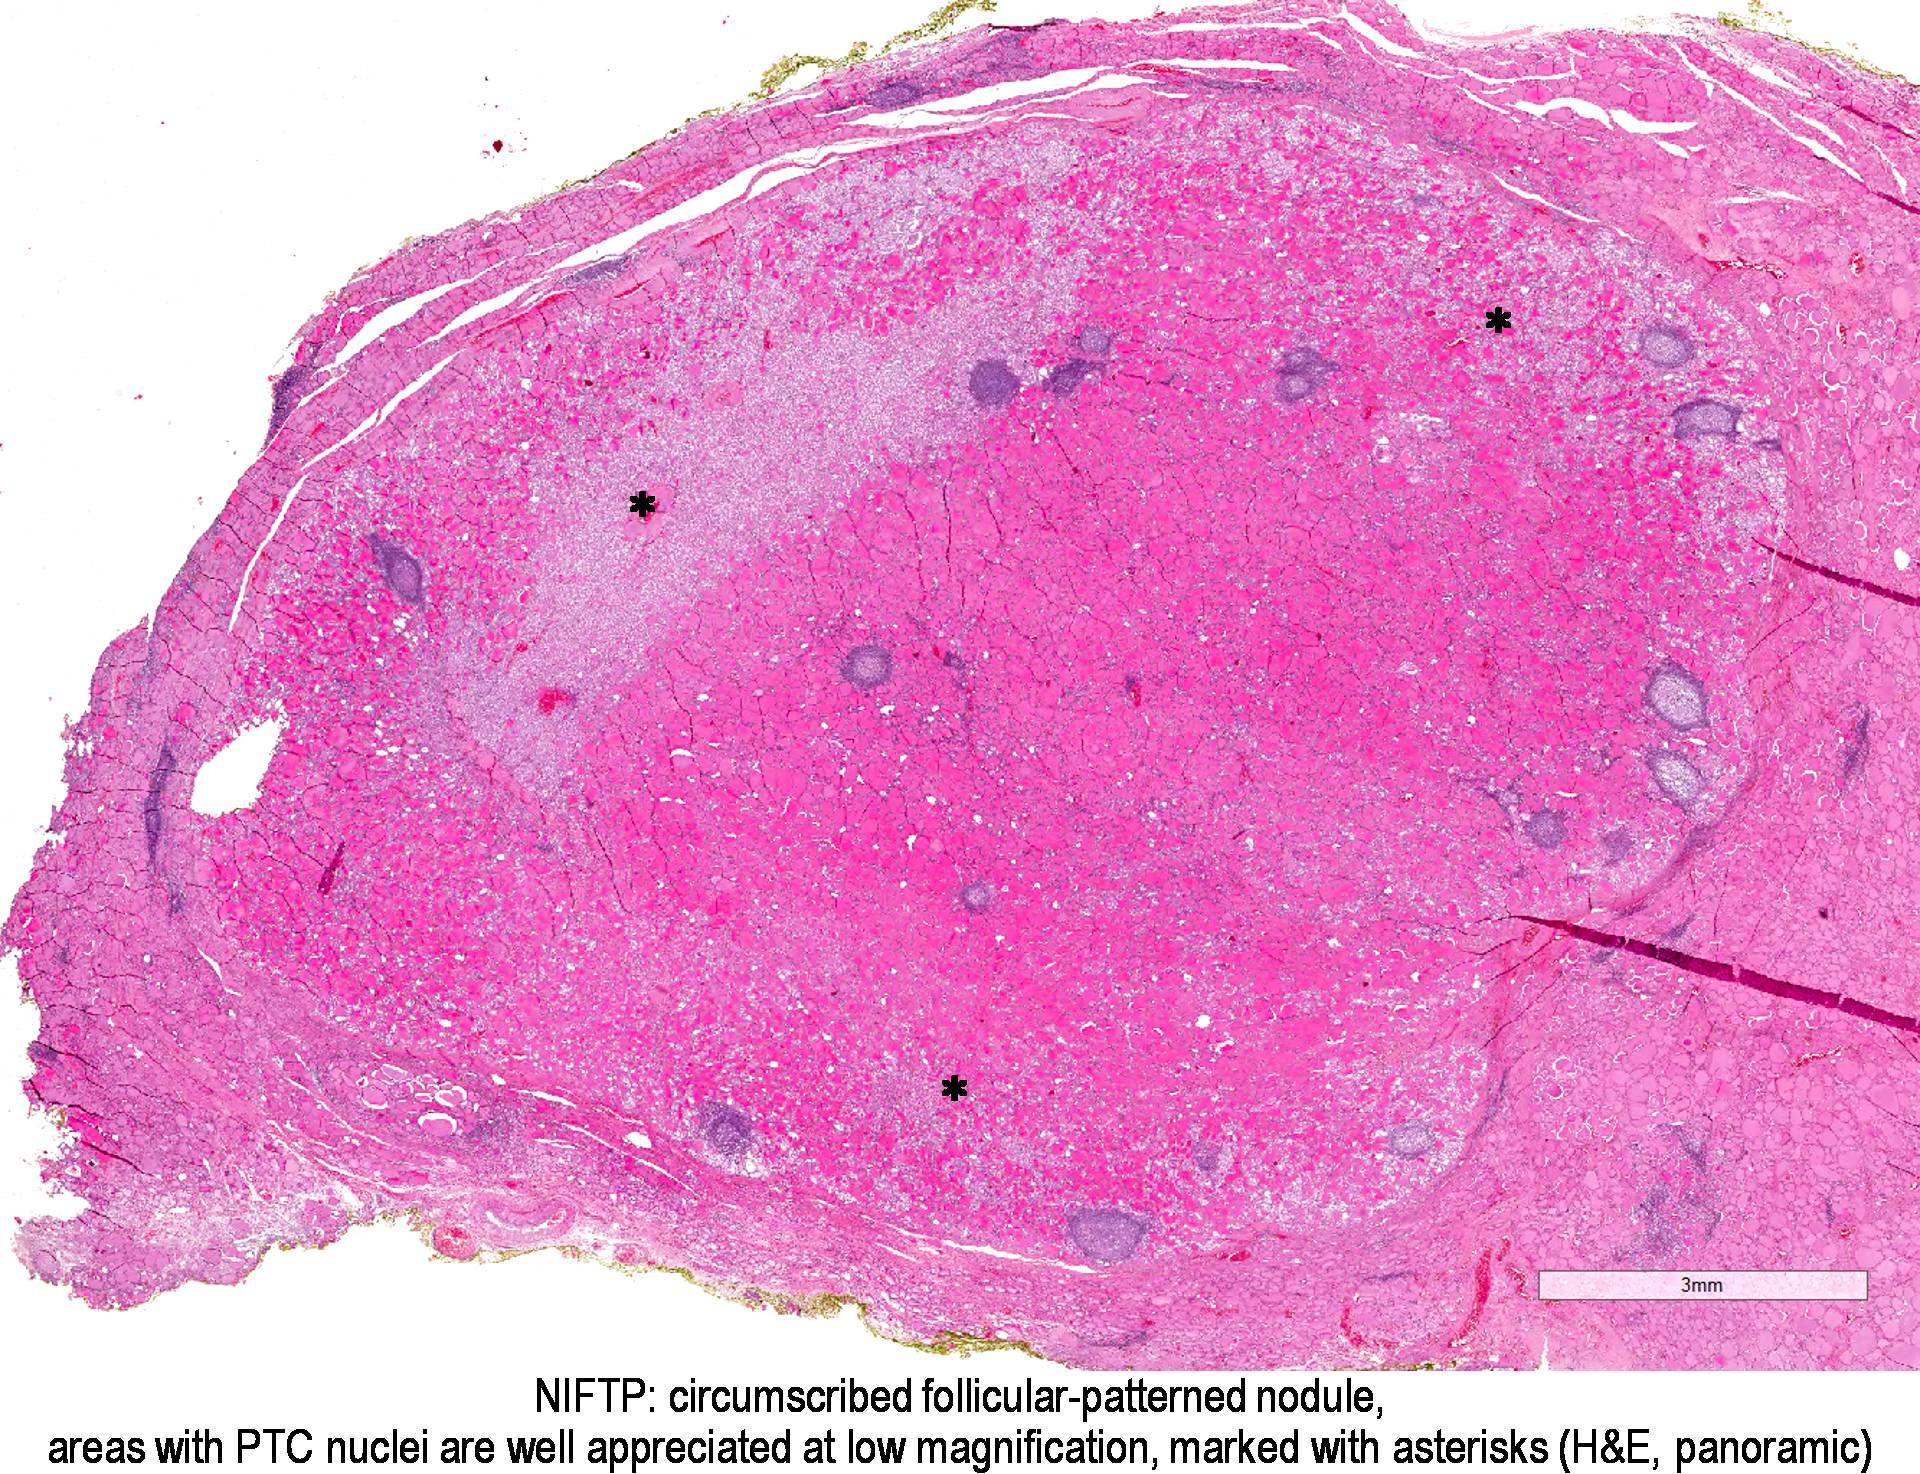 Pathology Outlines - Noninvasive follicular thyroid neoplasm with ...